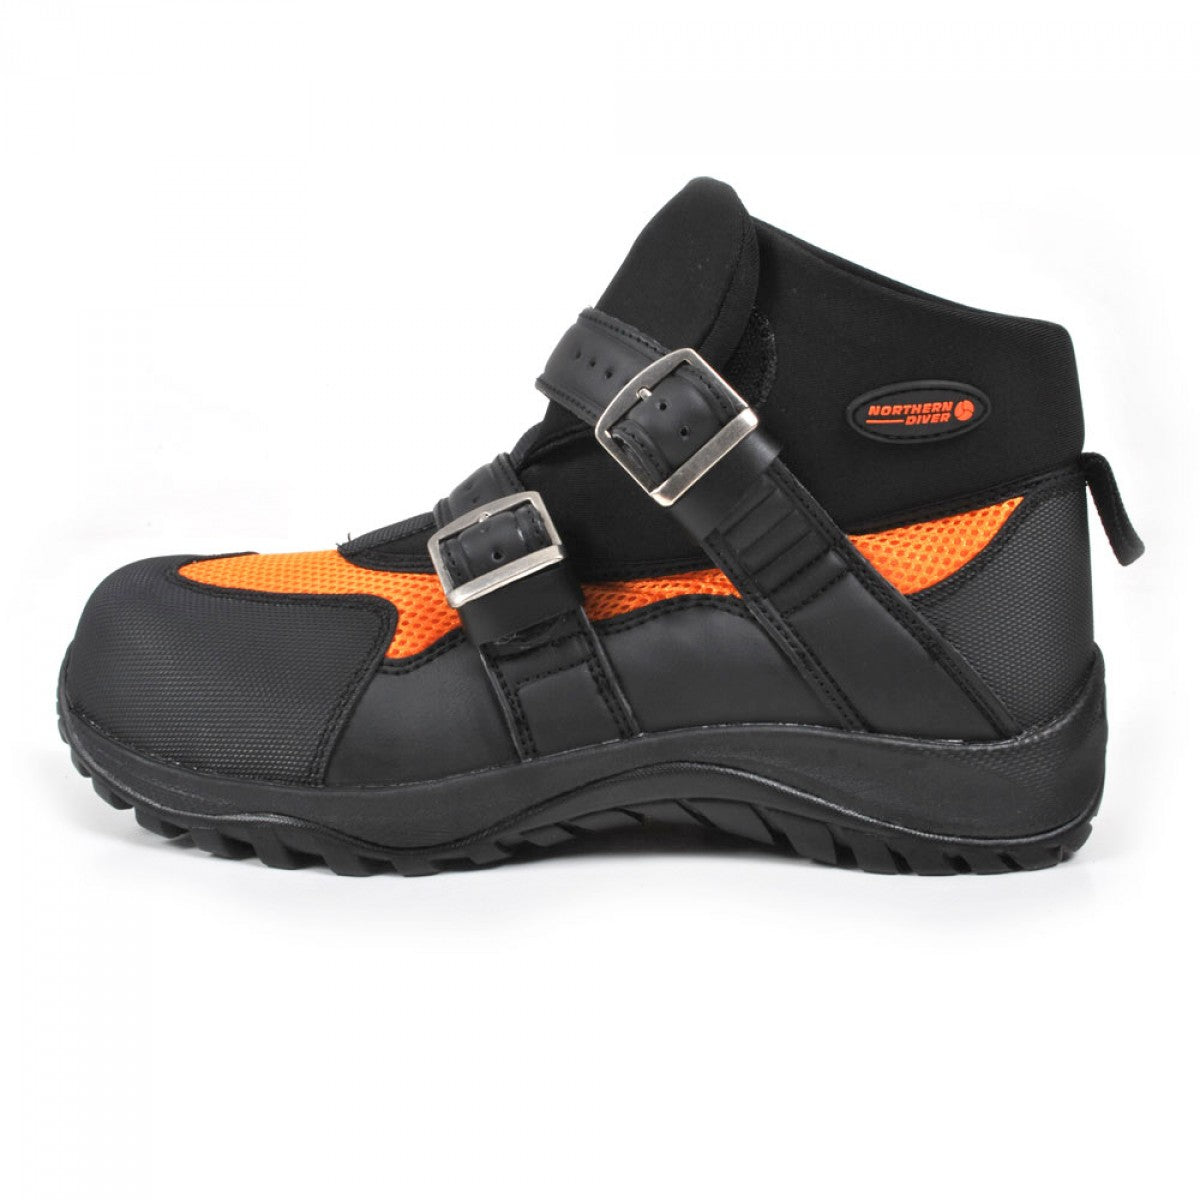 Northern Diver Steel Toe Whitewater Rescue Safety Boot